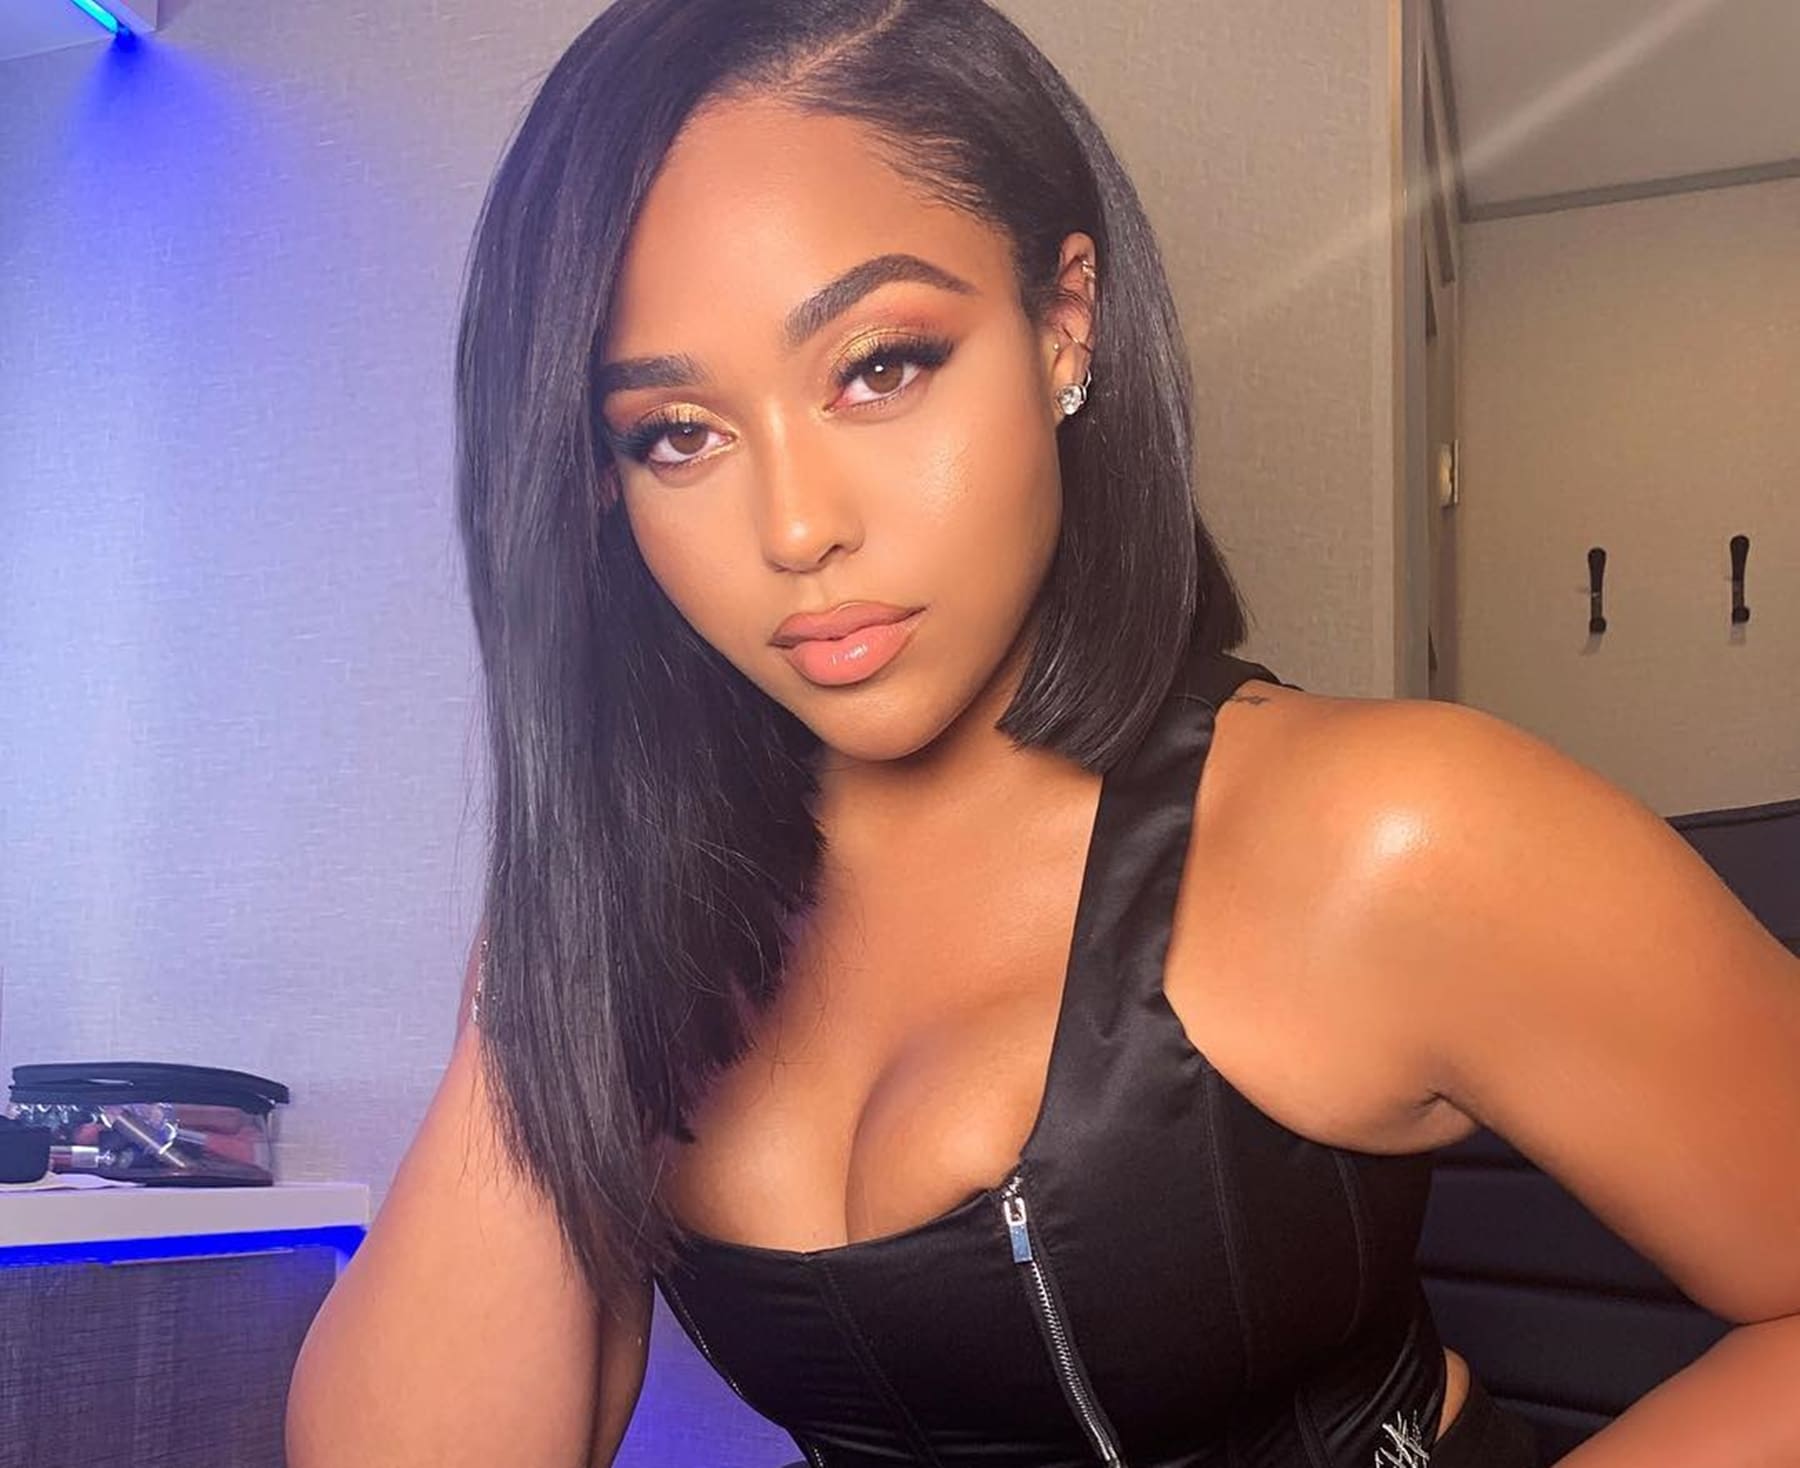 jordyn-woods-shares-an-exciting-video-featuring-her-mom-check-it-out-here